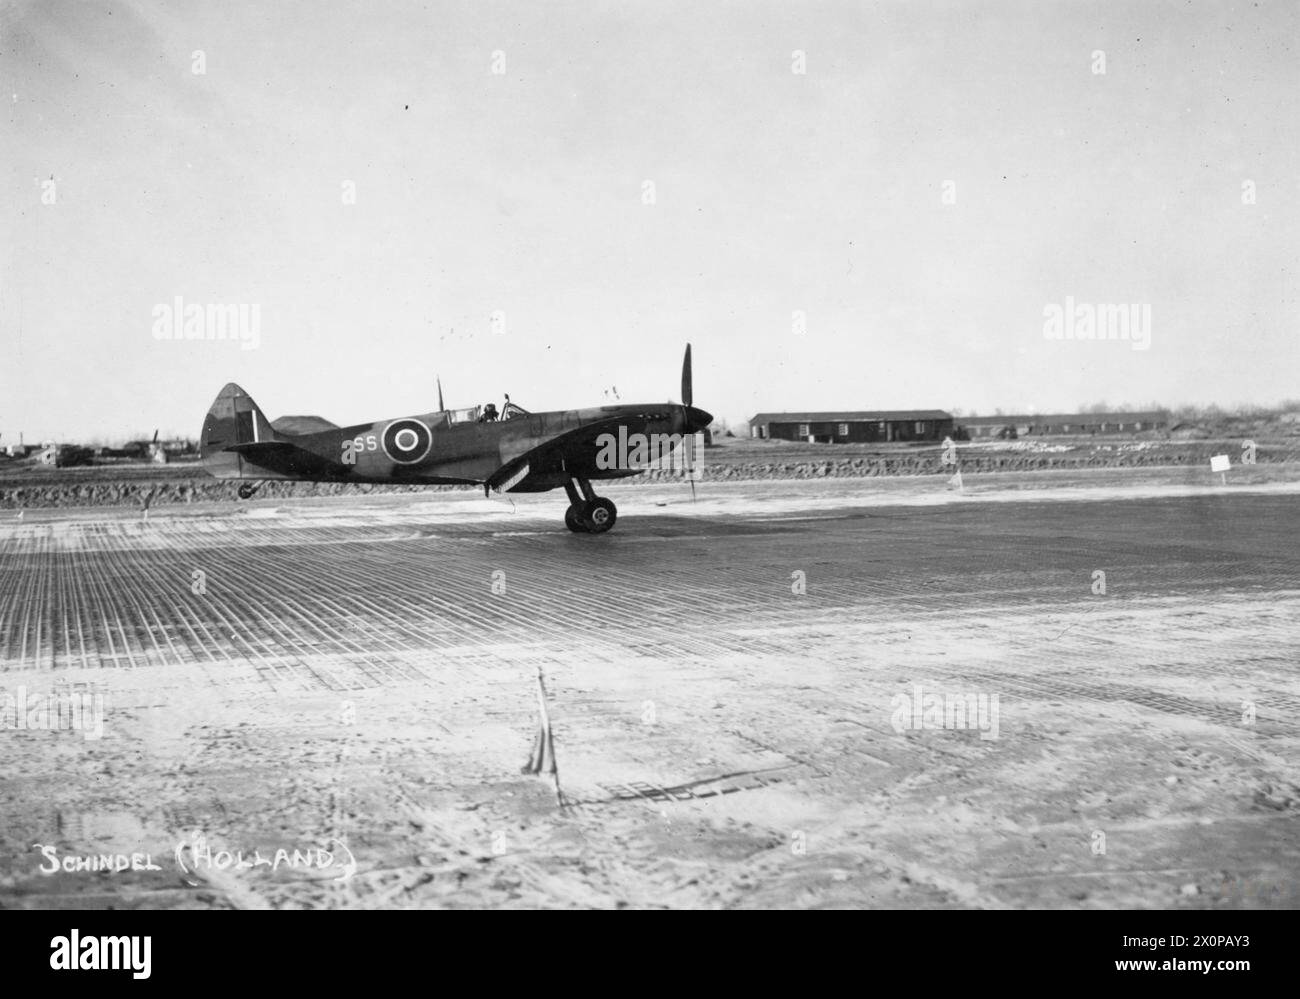 ROYAL AIR FORCE: 2ND TACTICAL AIR FORCE, 1943-1945. - Wing Commander R W F 'Sammy' Sampson, leader of No. 145 (Free French) Wing RAF, landing at B85/Schijndel, Holland, in his personal Supermarine Spitfire Mark IX, RK853 'SS' Royal Air Force, Group, 84, Royal Air Force, Maintenance Unit, 201 Stock Photo